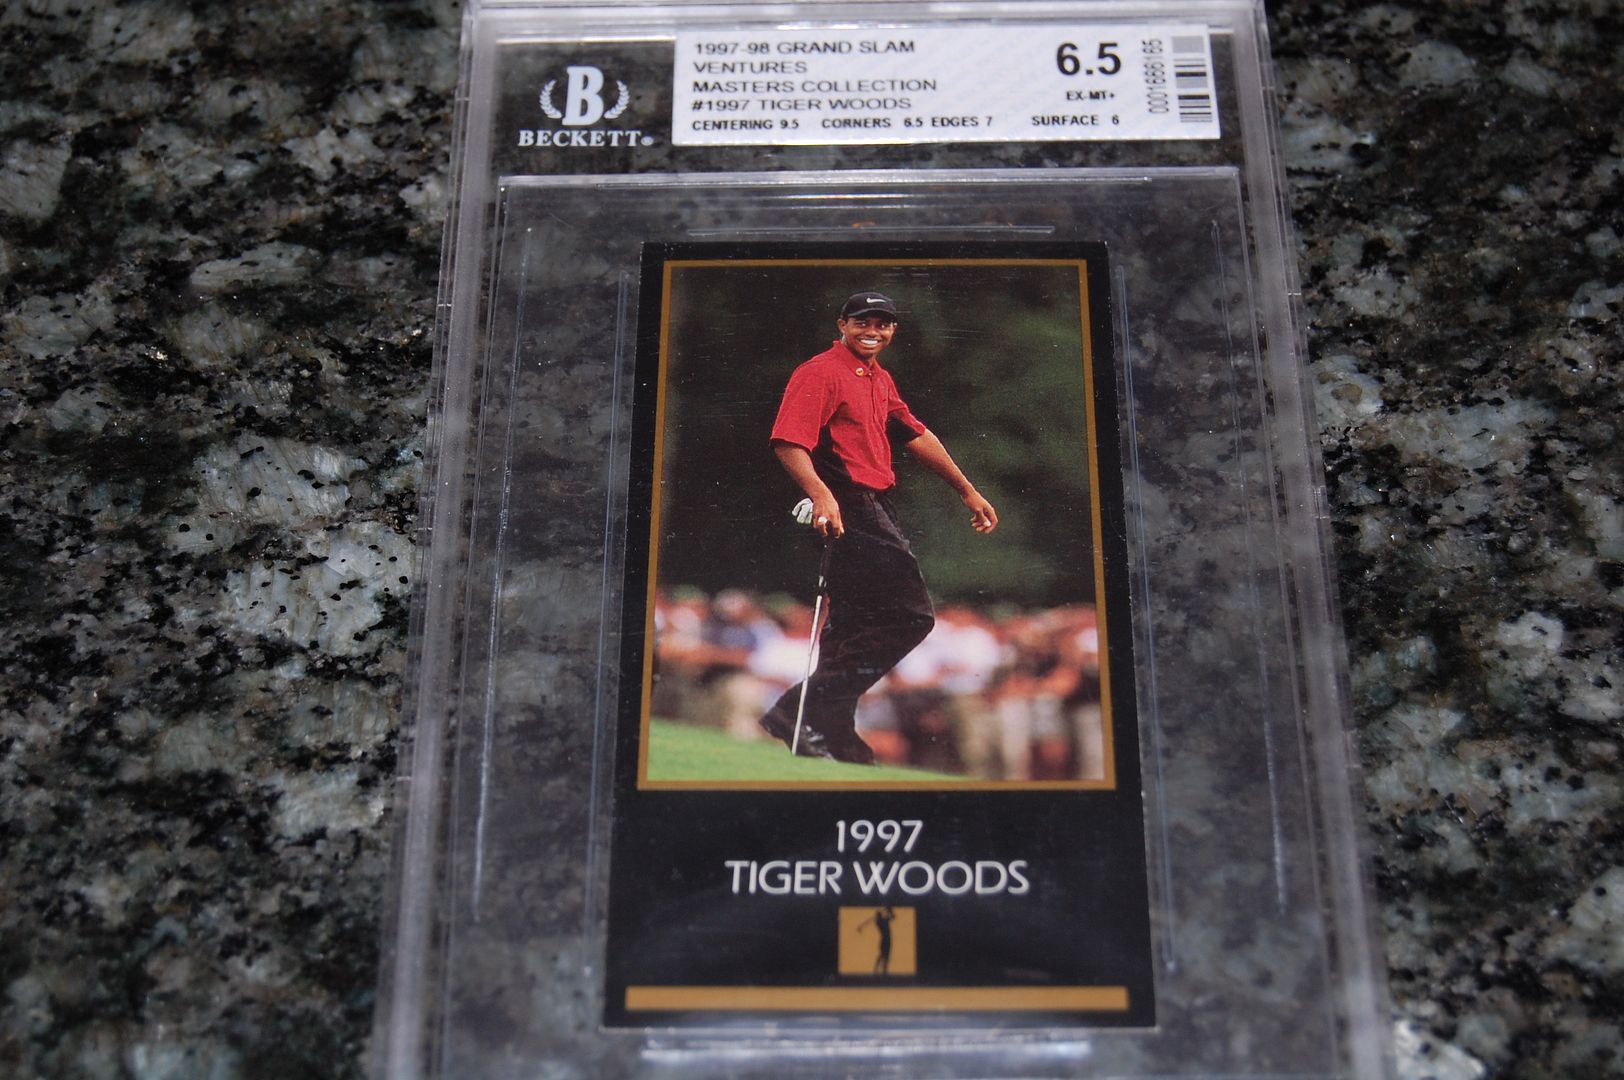 LARGE HIGH DOLLAR TIGER WOODS ROOKIE CARD COLLECTION!!! MUST SEE!!! | eBay